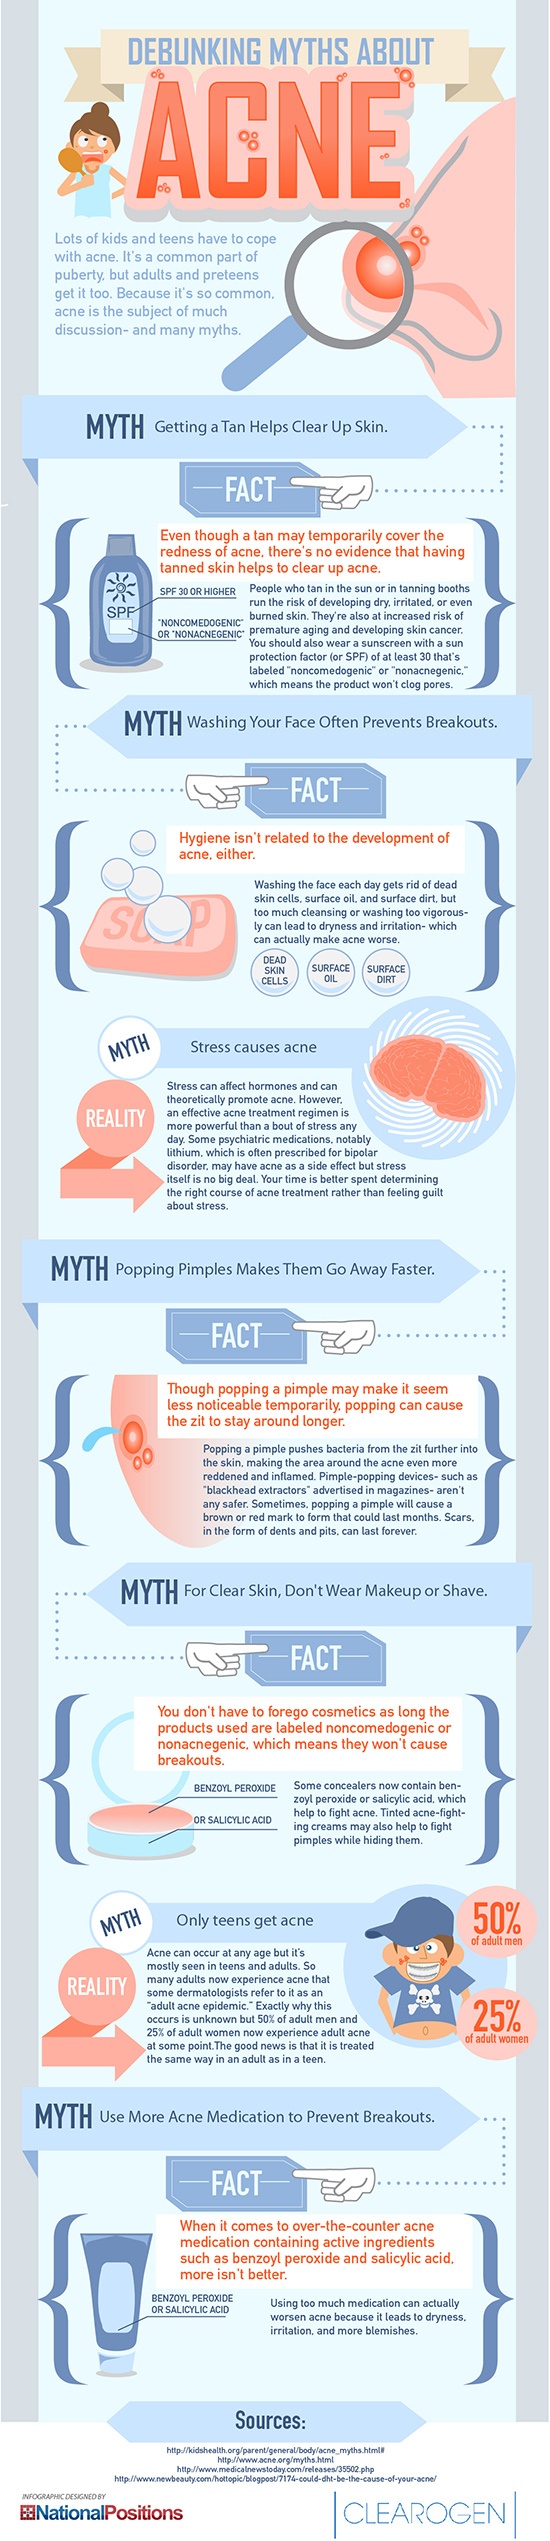 Debunking Myths About Acne - Infographic